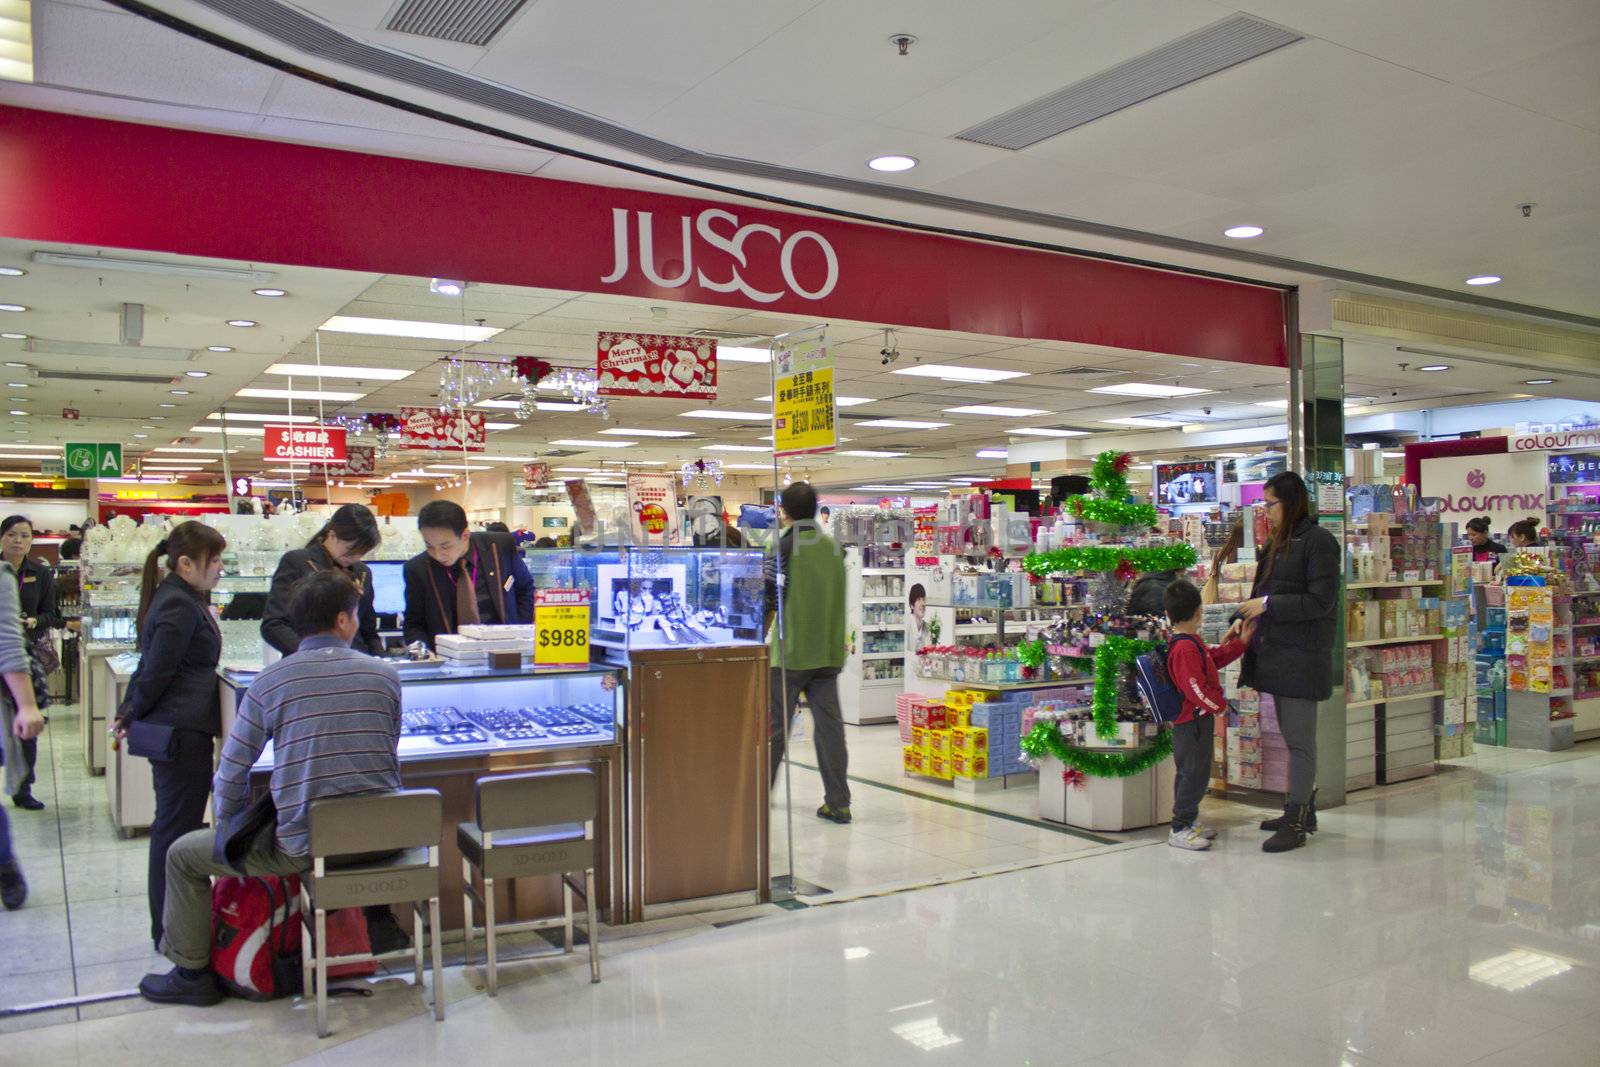 Jusco brand in a shopping mall by kawing921